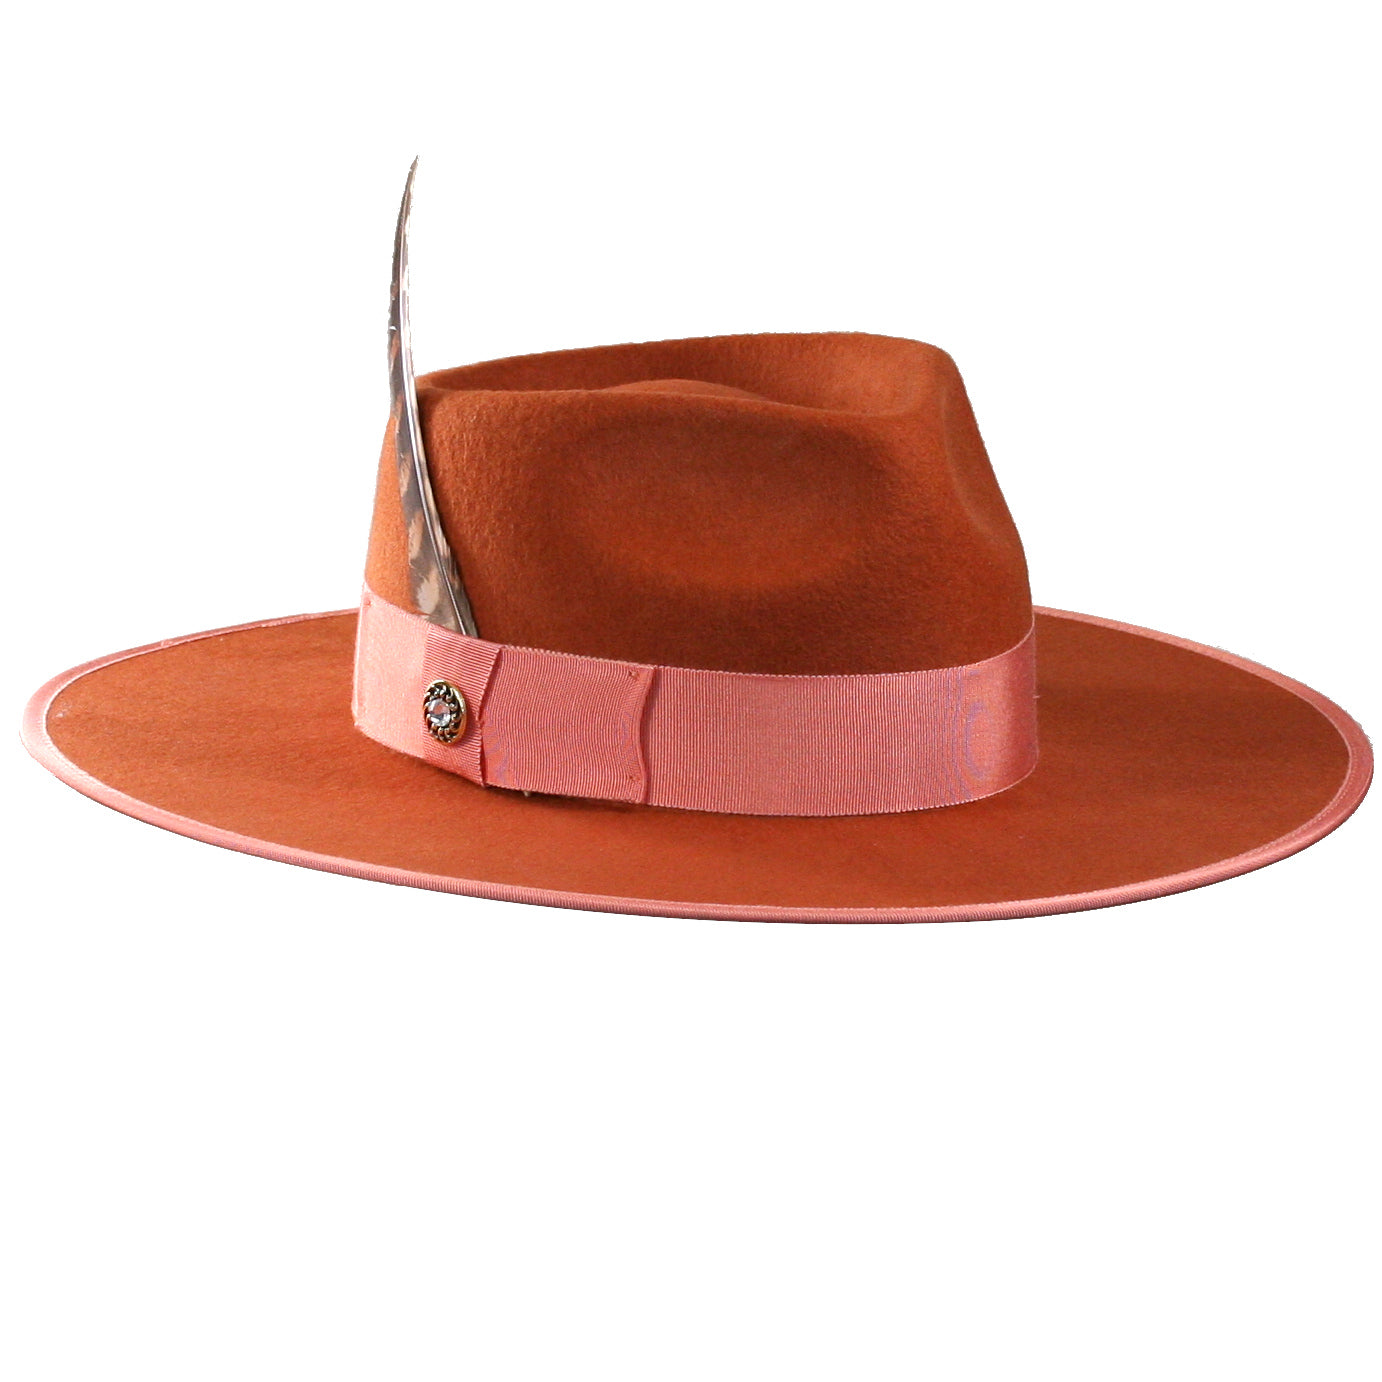 Dope Hats Store Fedora Sizing Guide